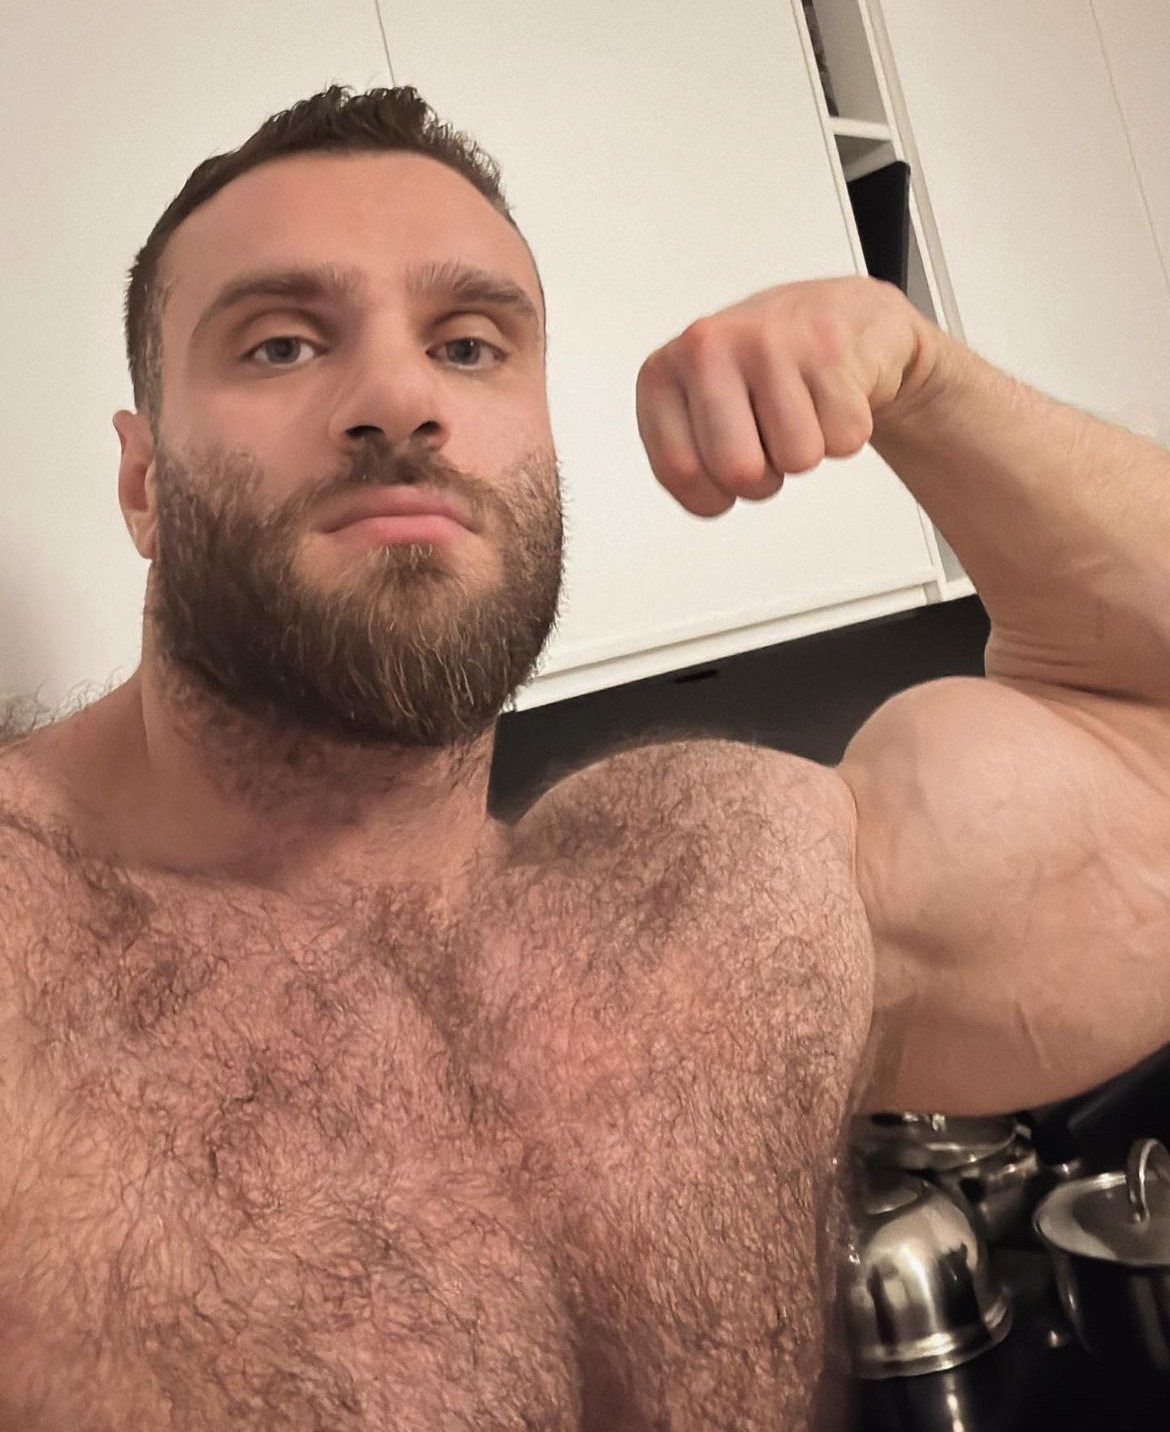 staypumpt  Muscle men, Guy pictures, Big muscles